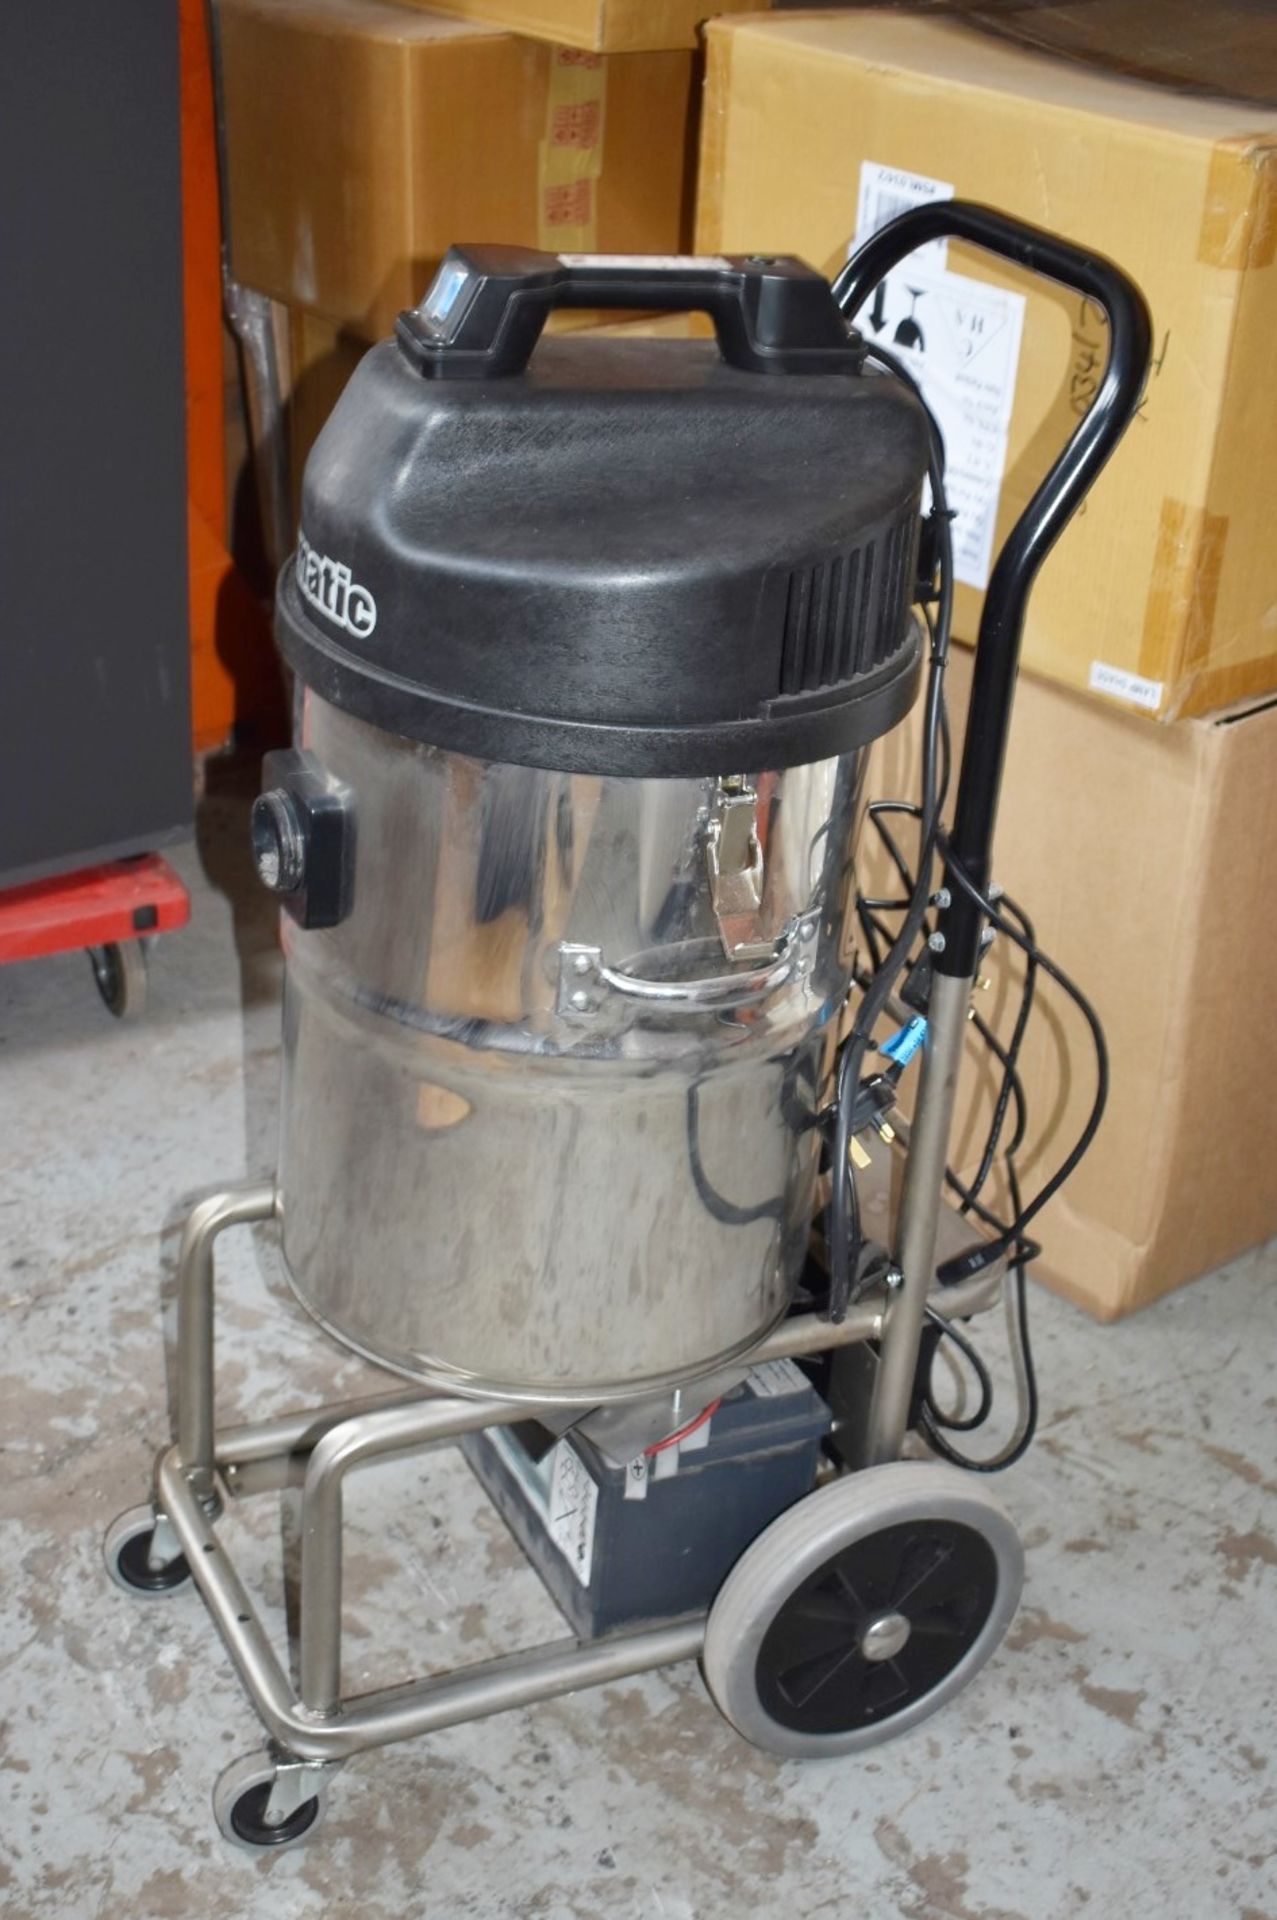 1 x Numatic WVDB750 Battery Powered Wet & Dry Vacuum Cleaner With Stainless Steel Body - Image 4 of 7